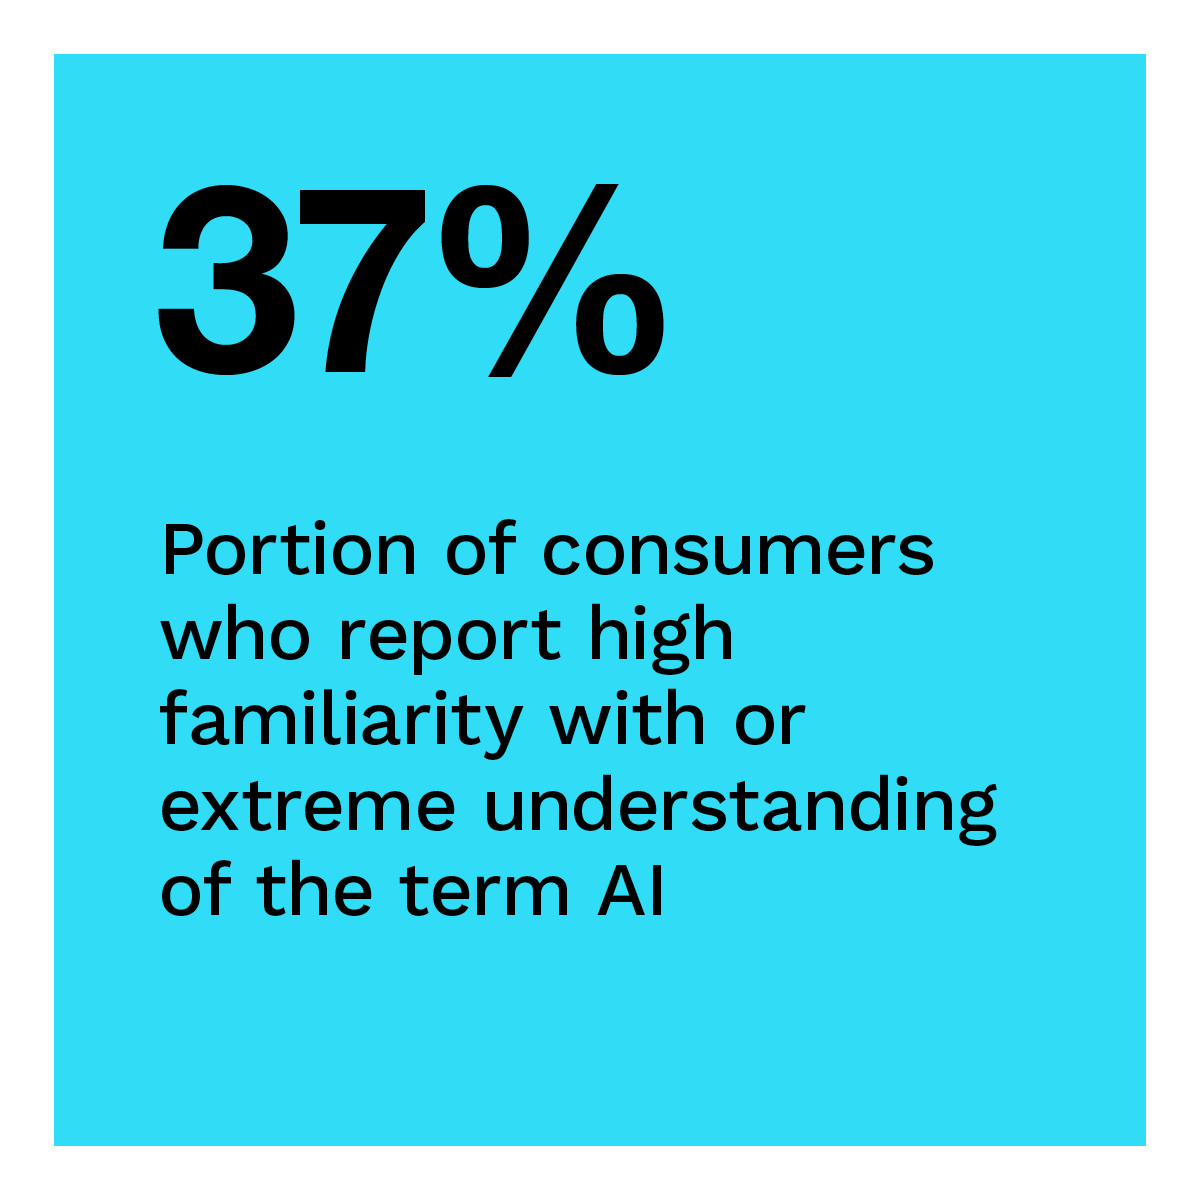 37%: Portion of consumers who report high familiarity with or extreme understanding of the term AI